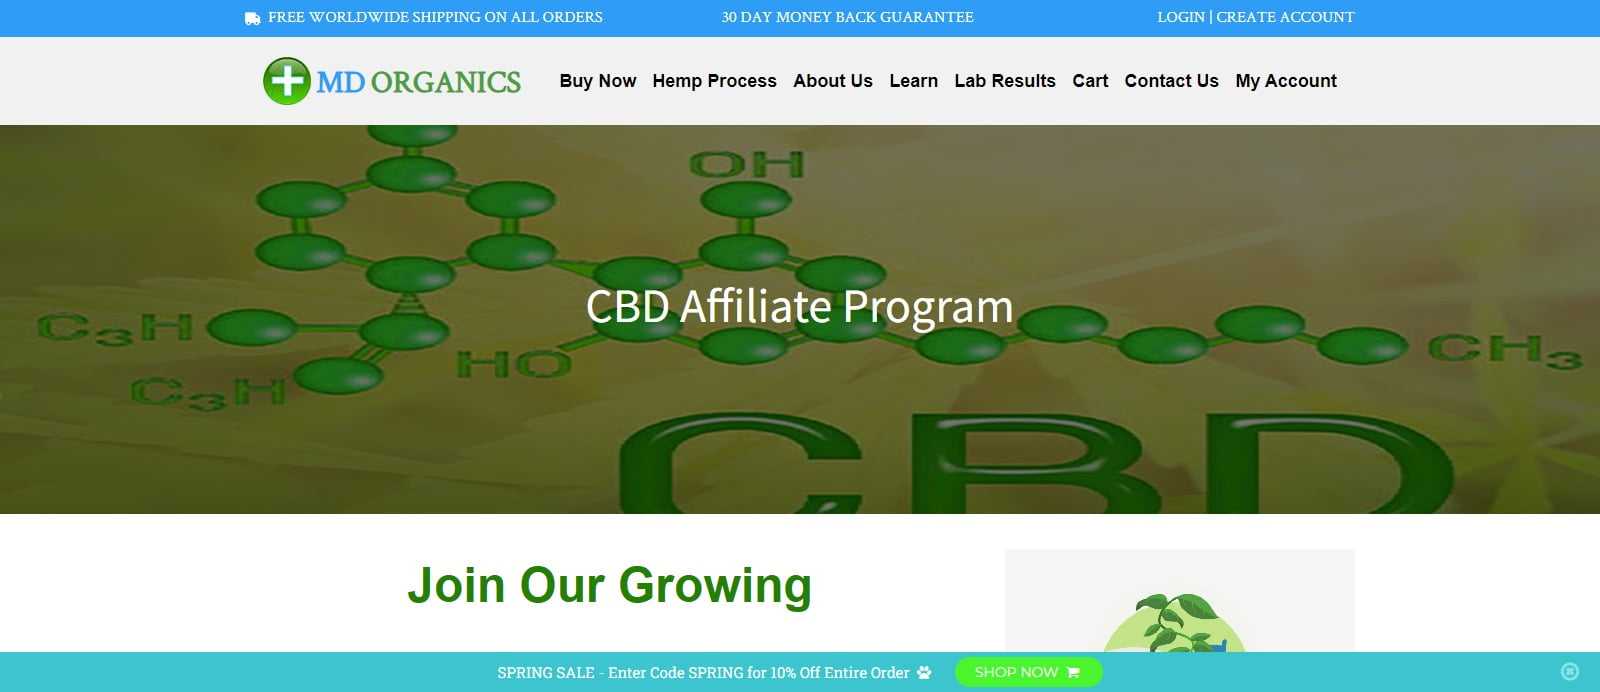 MD Organics Affiliate Program Review: 25% Commission on Each sale